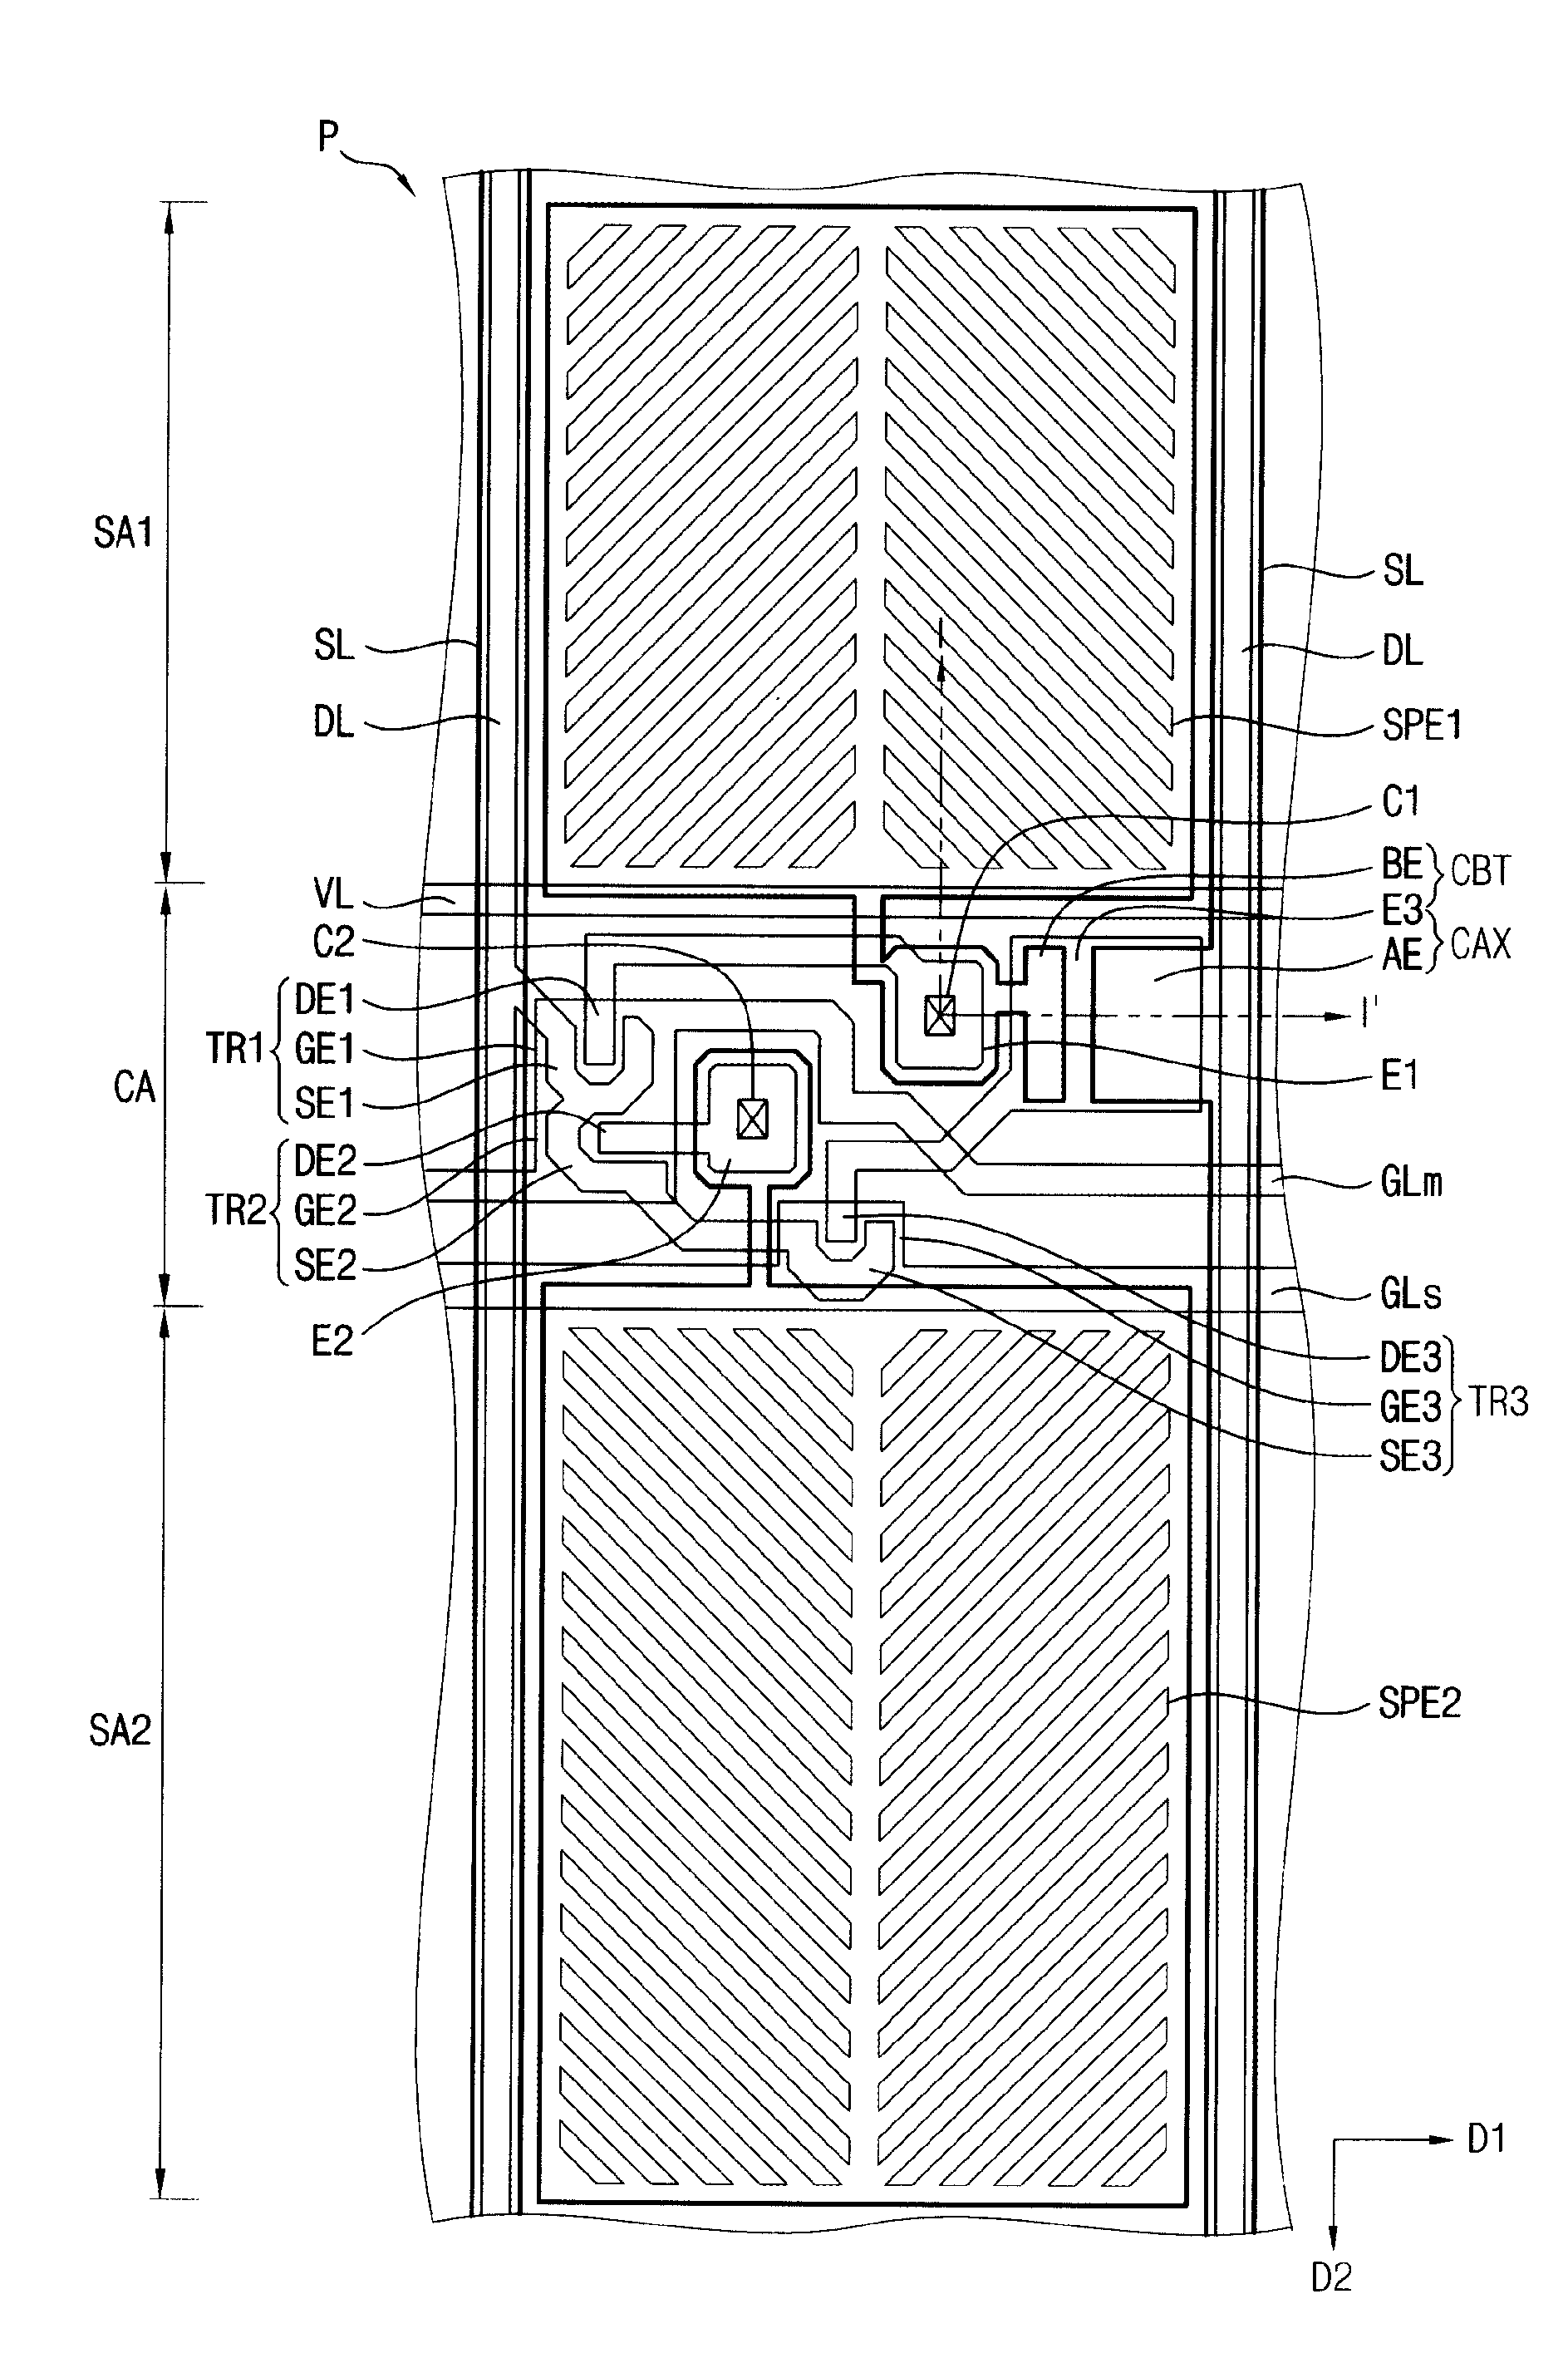 Display substrate including an auxiliary electrode